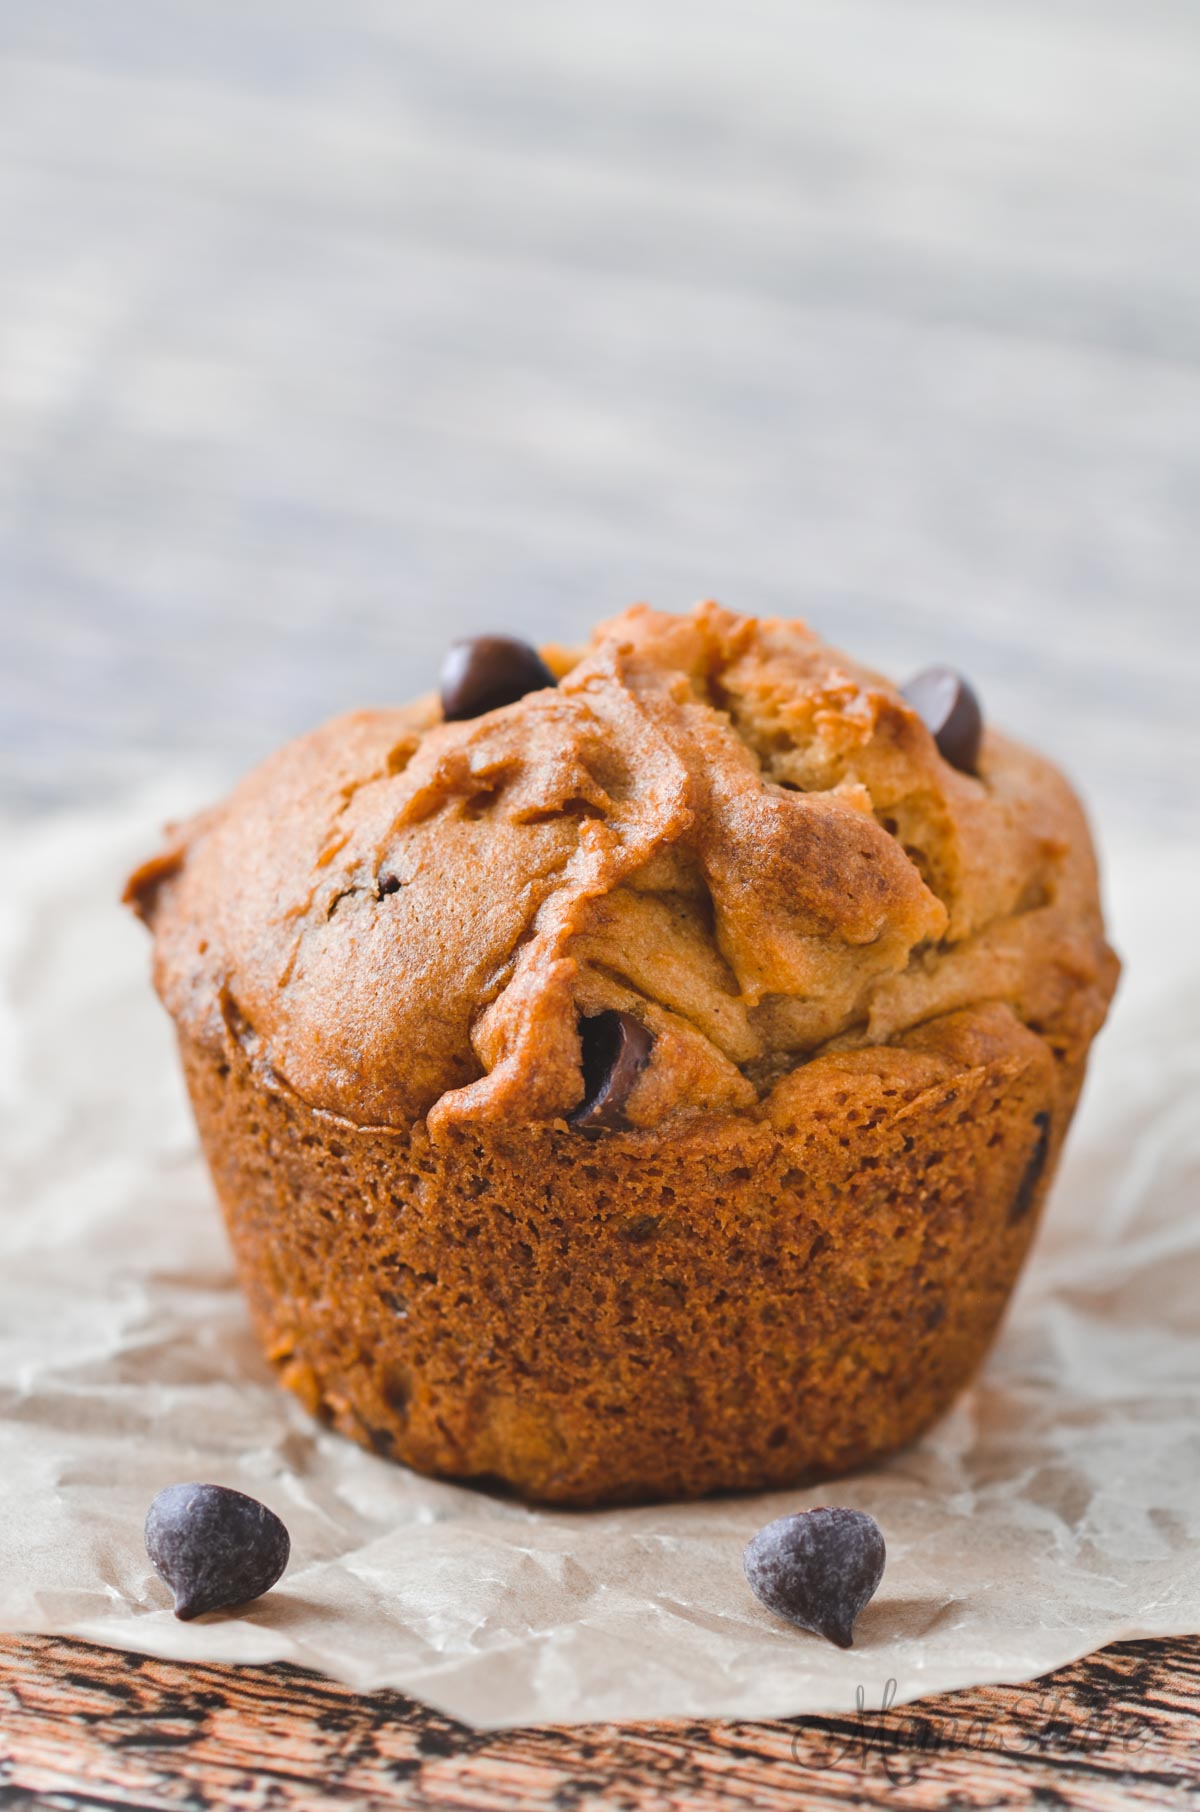 A pumpkin muffin made with chocolate chips. There are a couple of chocolate chips laying around it.